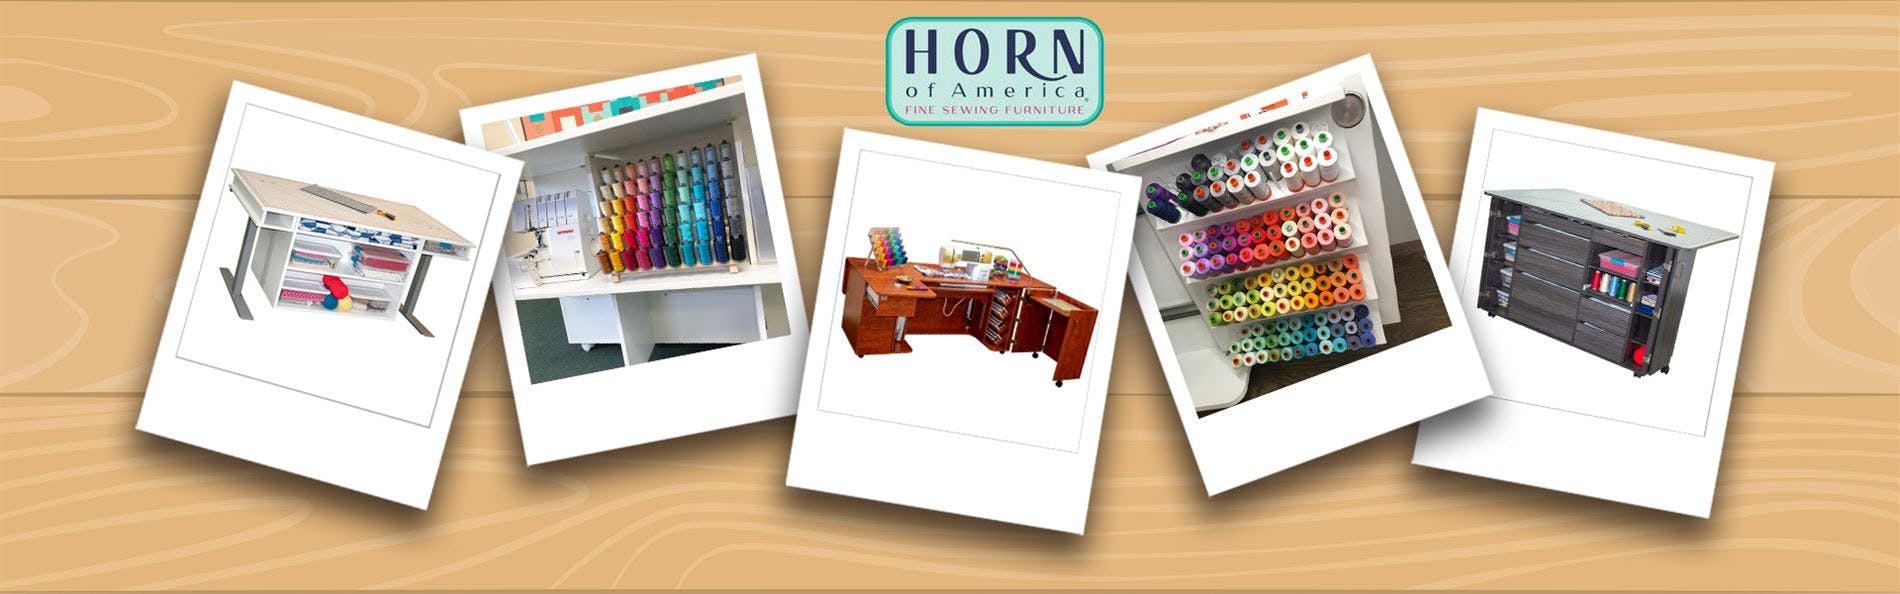 Horn Sewing Furniture banner